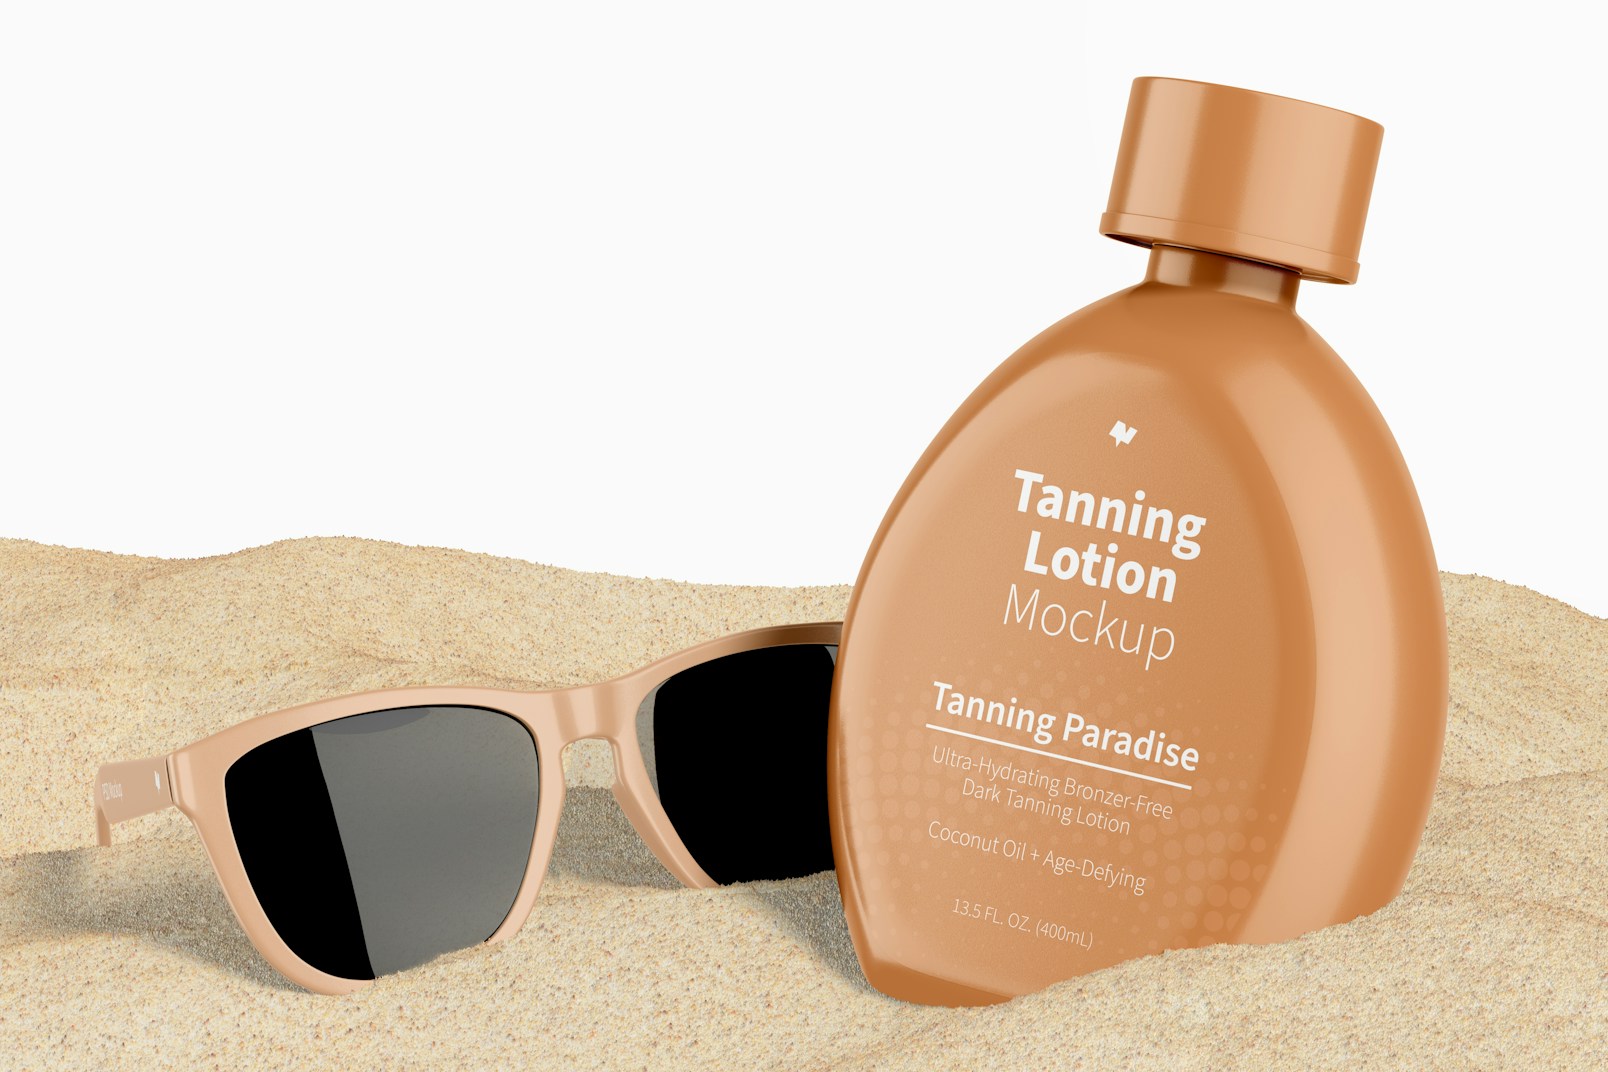 13.5 oz Tanning Lotion Bottle with Sunglasses Mockup